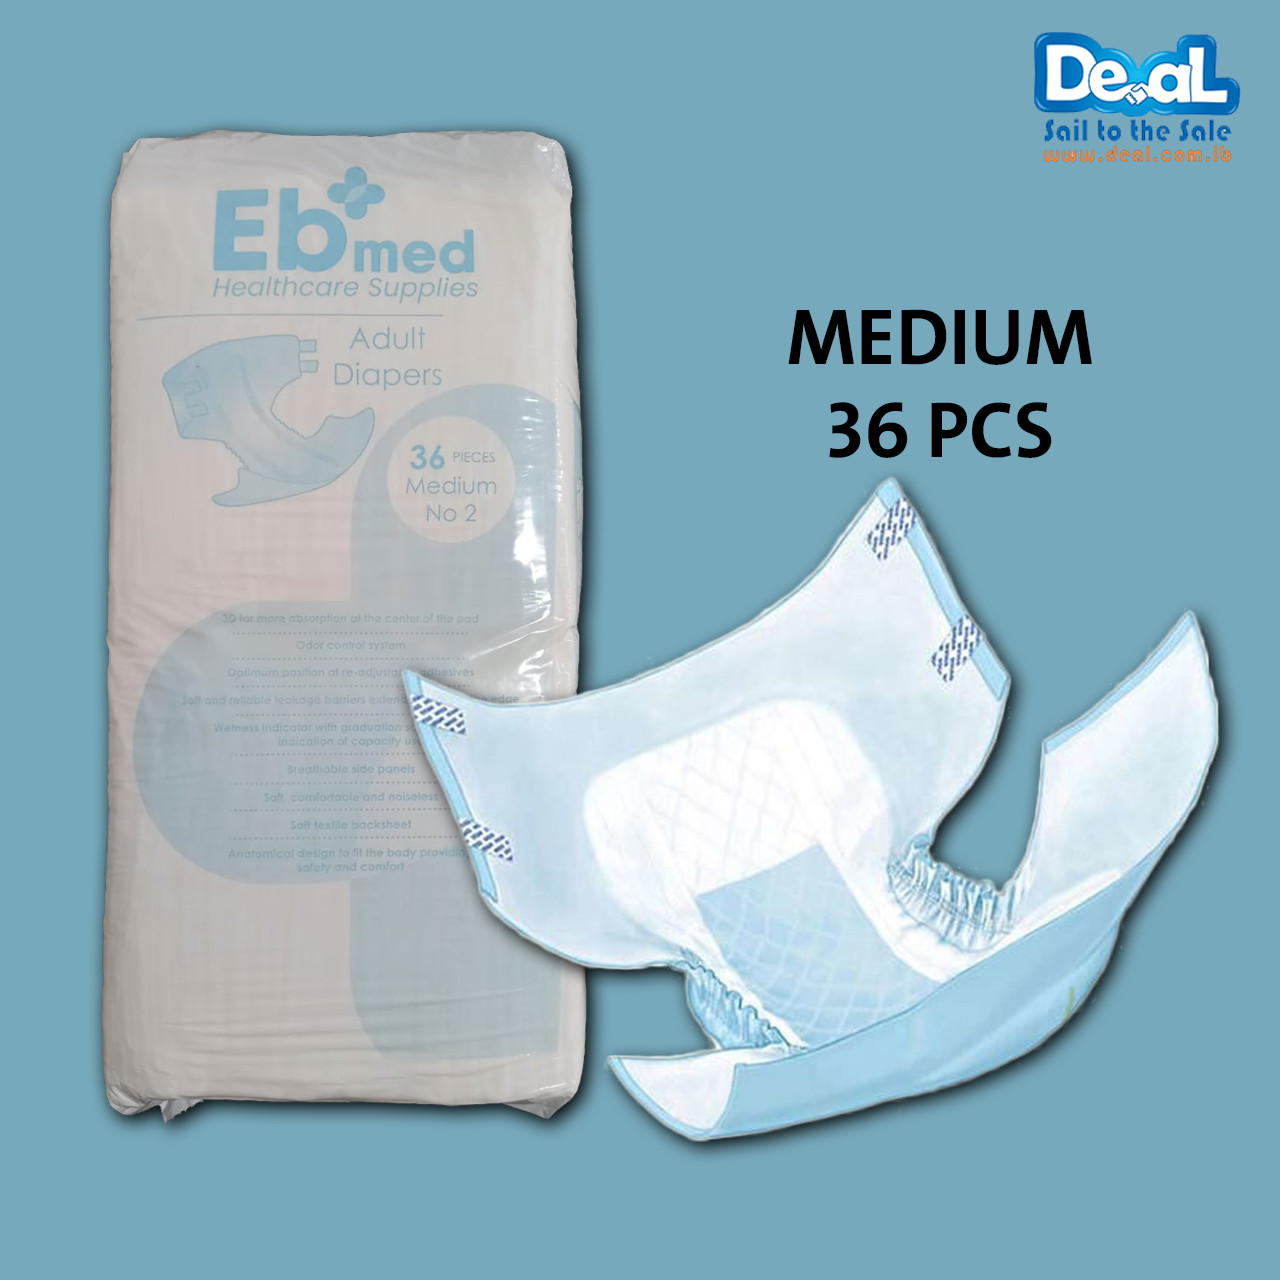 Eb med Adult Diapers 36 Pieces | Medium Size